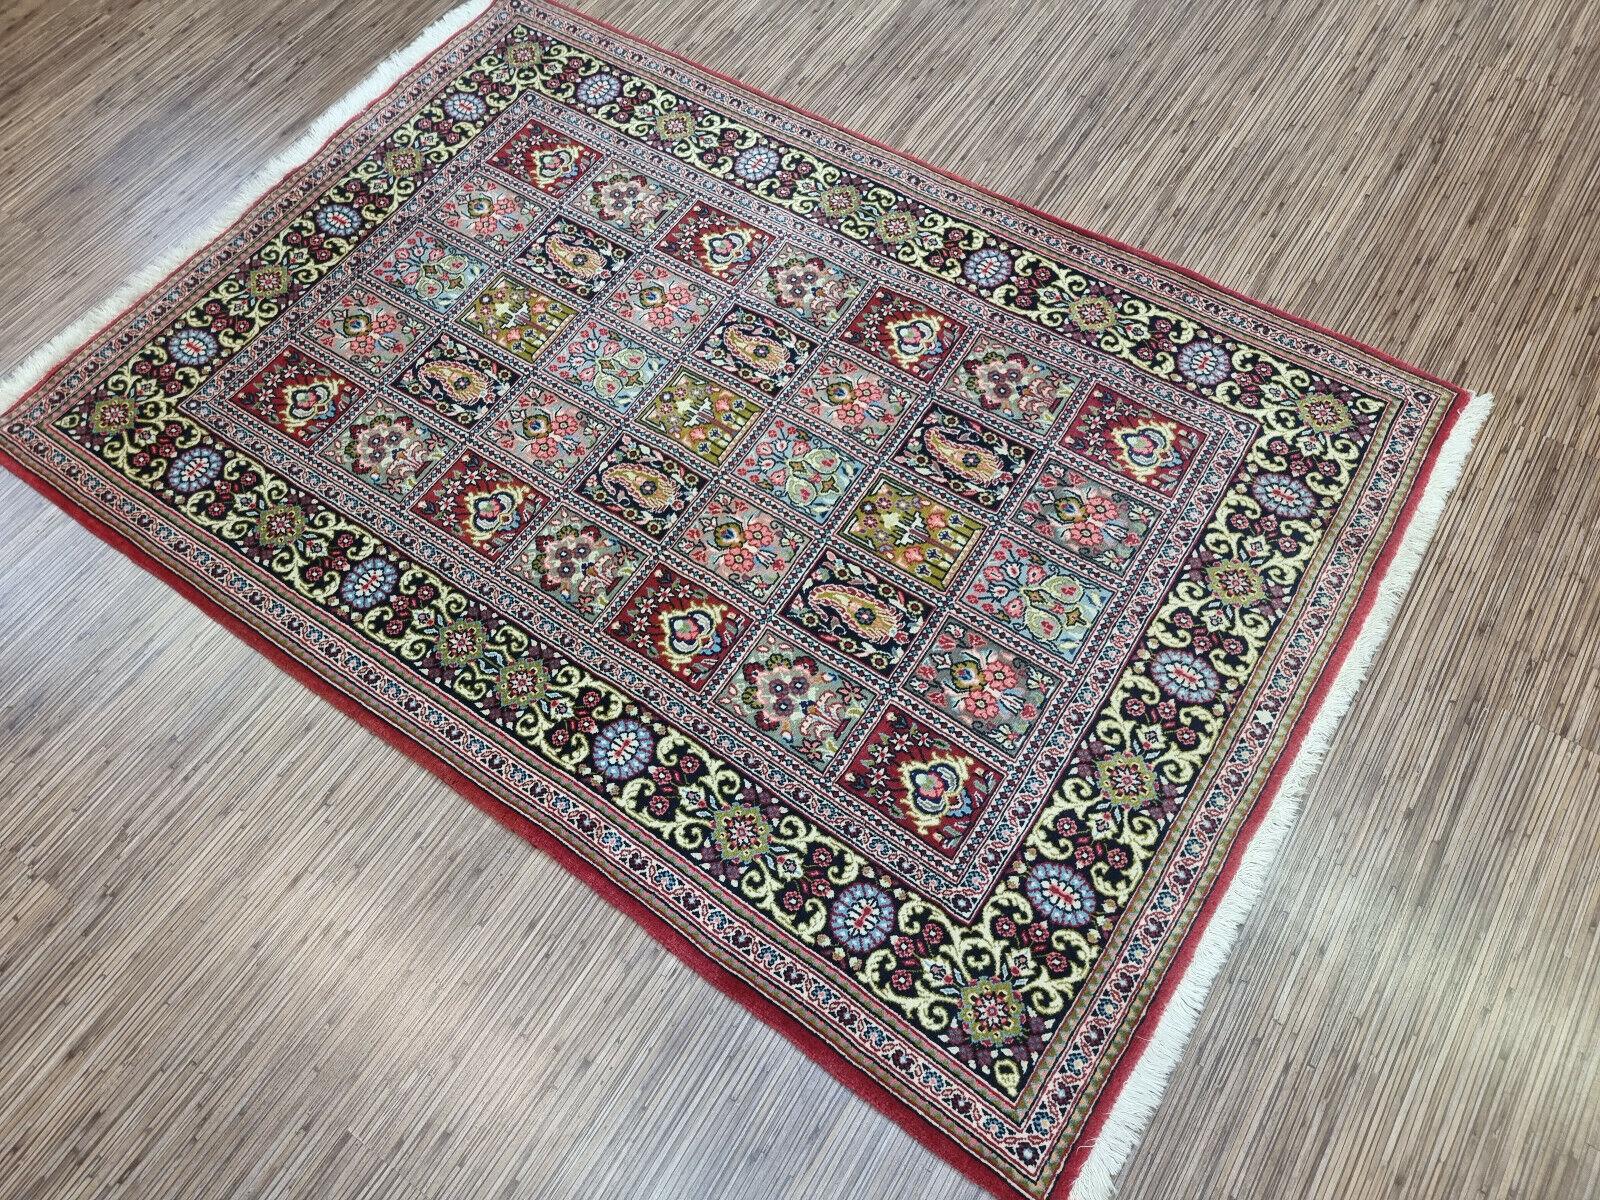 Handmade Vintage Persian Style Qum Rug 3.6’ x 5.1’, 1970s, Good Condition, Wool

Enhance your space with this handmade vintage Persian style Qum rug. This beautiful rug was crafted in the 1970s, showcasing the exquisite craftsmanship and intricate